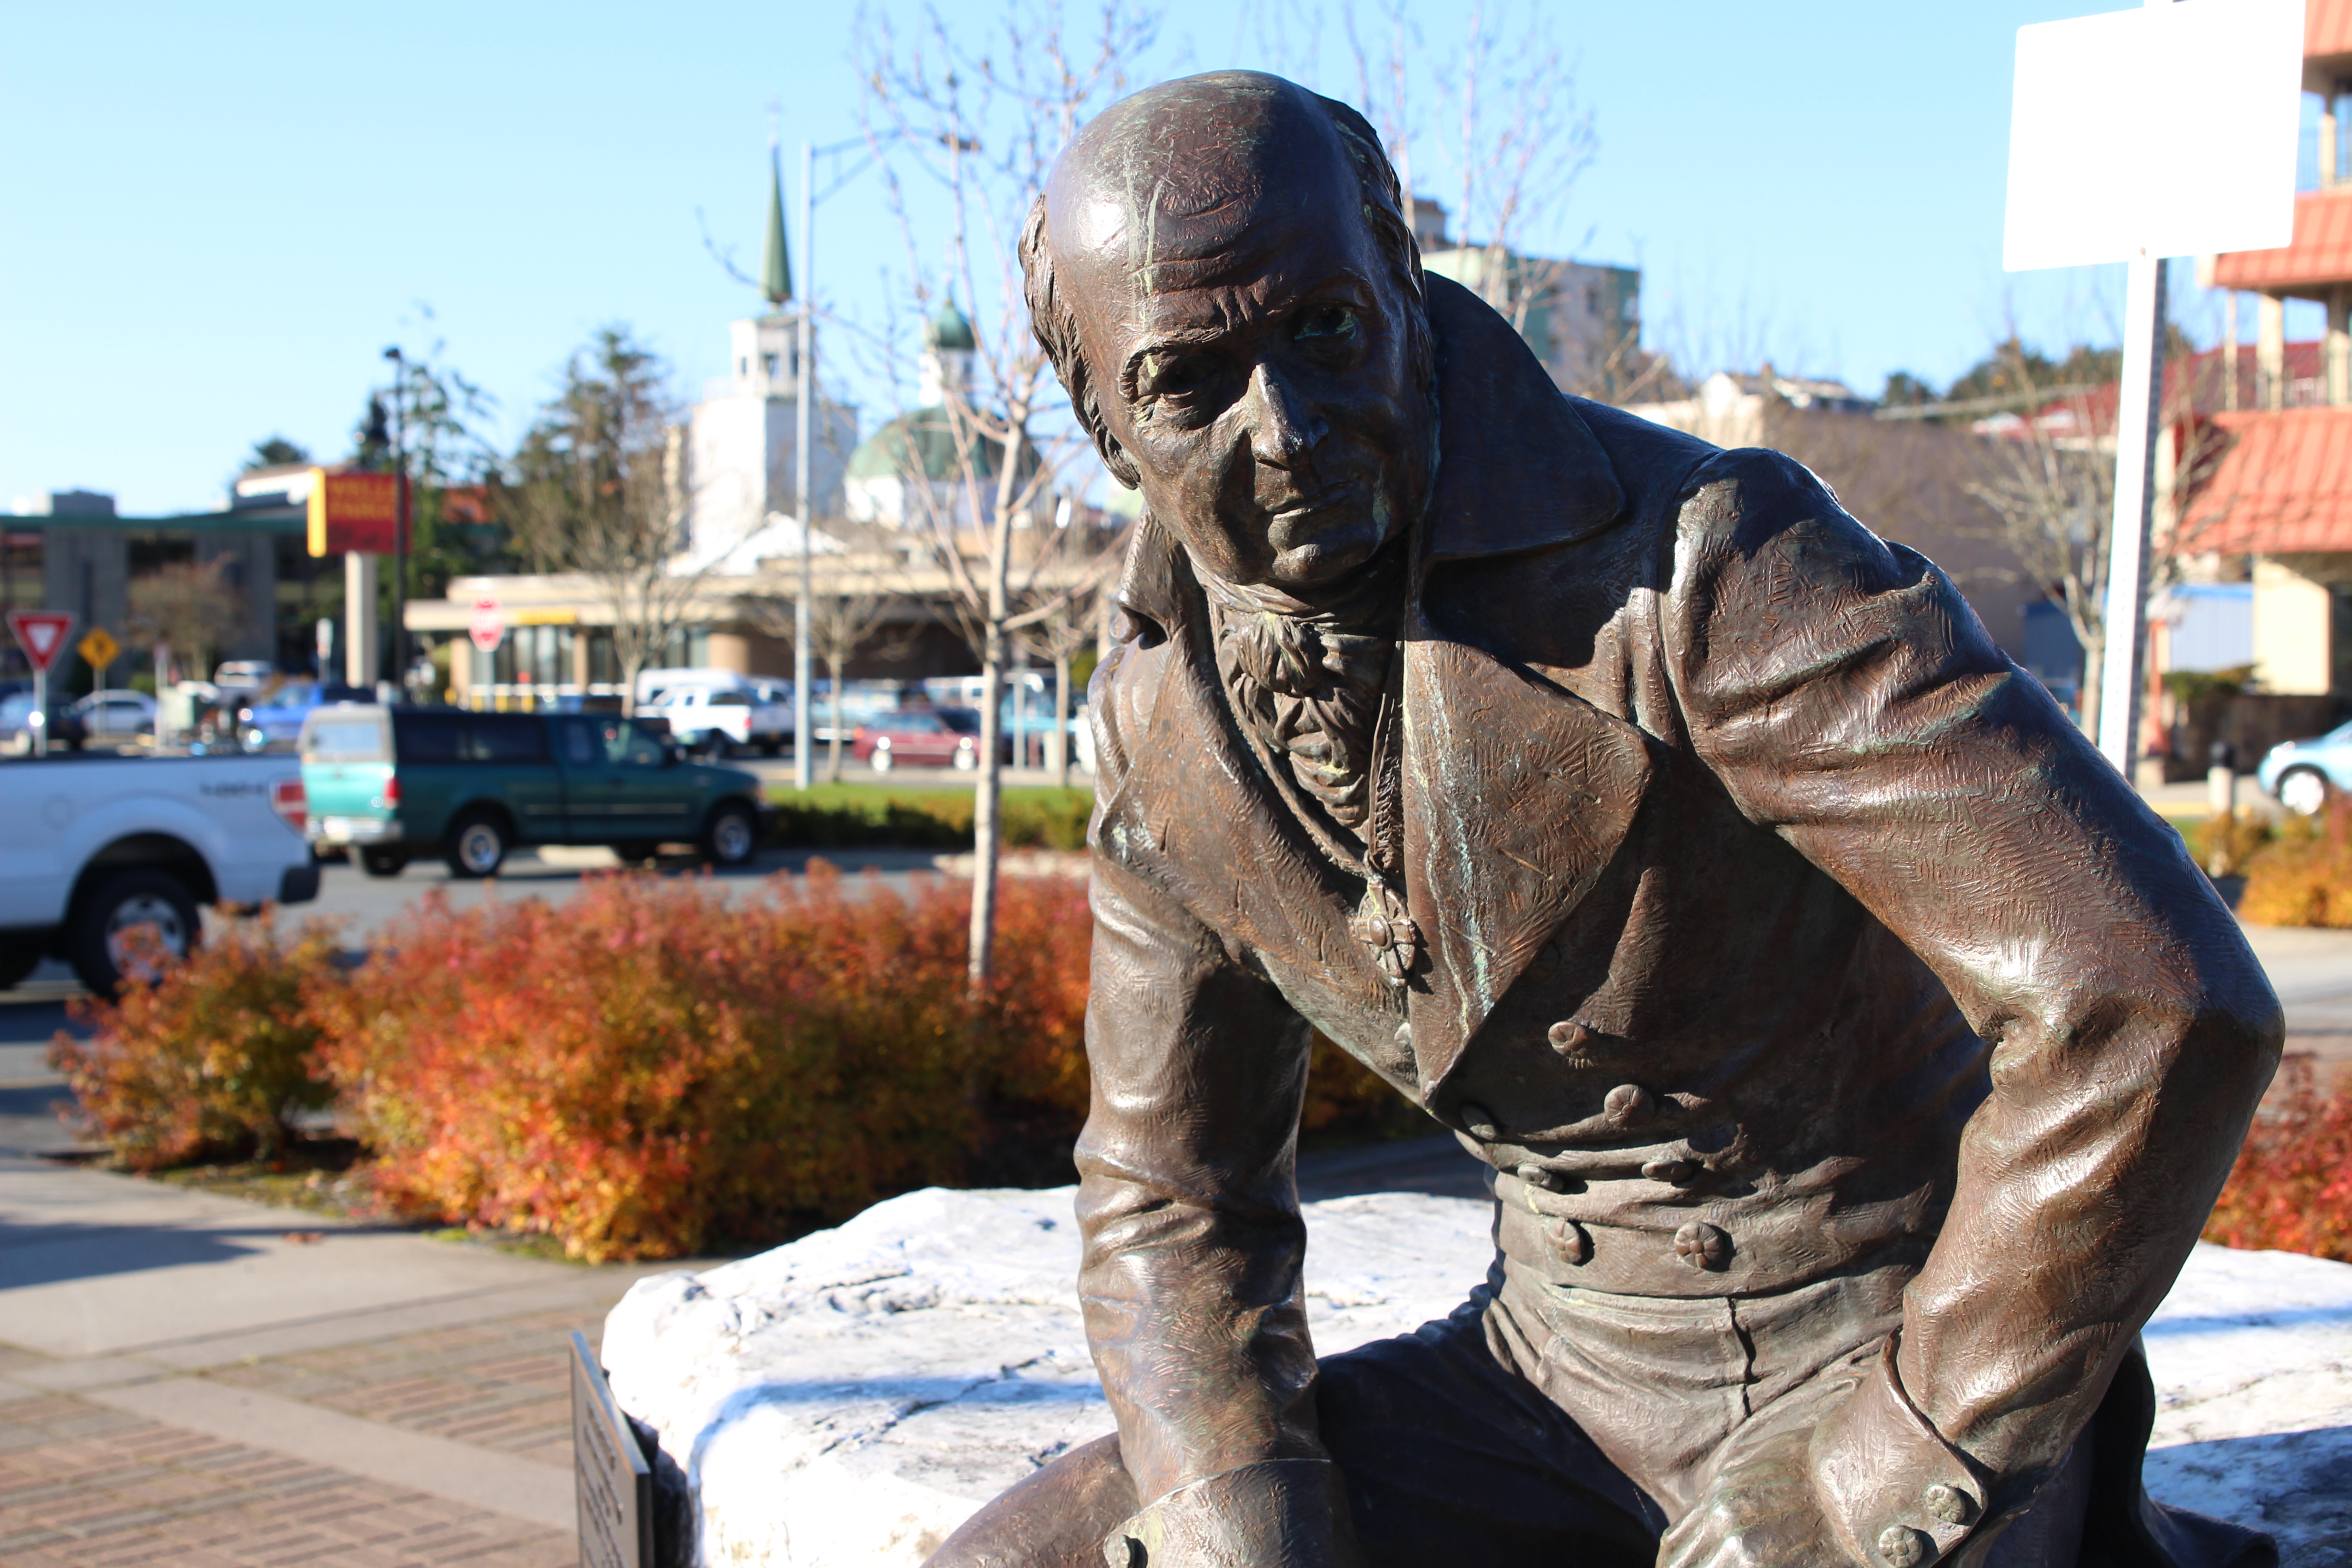 Alexander Baranov was the first general manager of the Russian-American Company, and the statue of him was erected to honor the role of commerce in Sitka’s past. (Photo by Katherine Rose/KCAW0